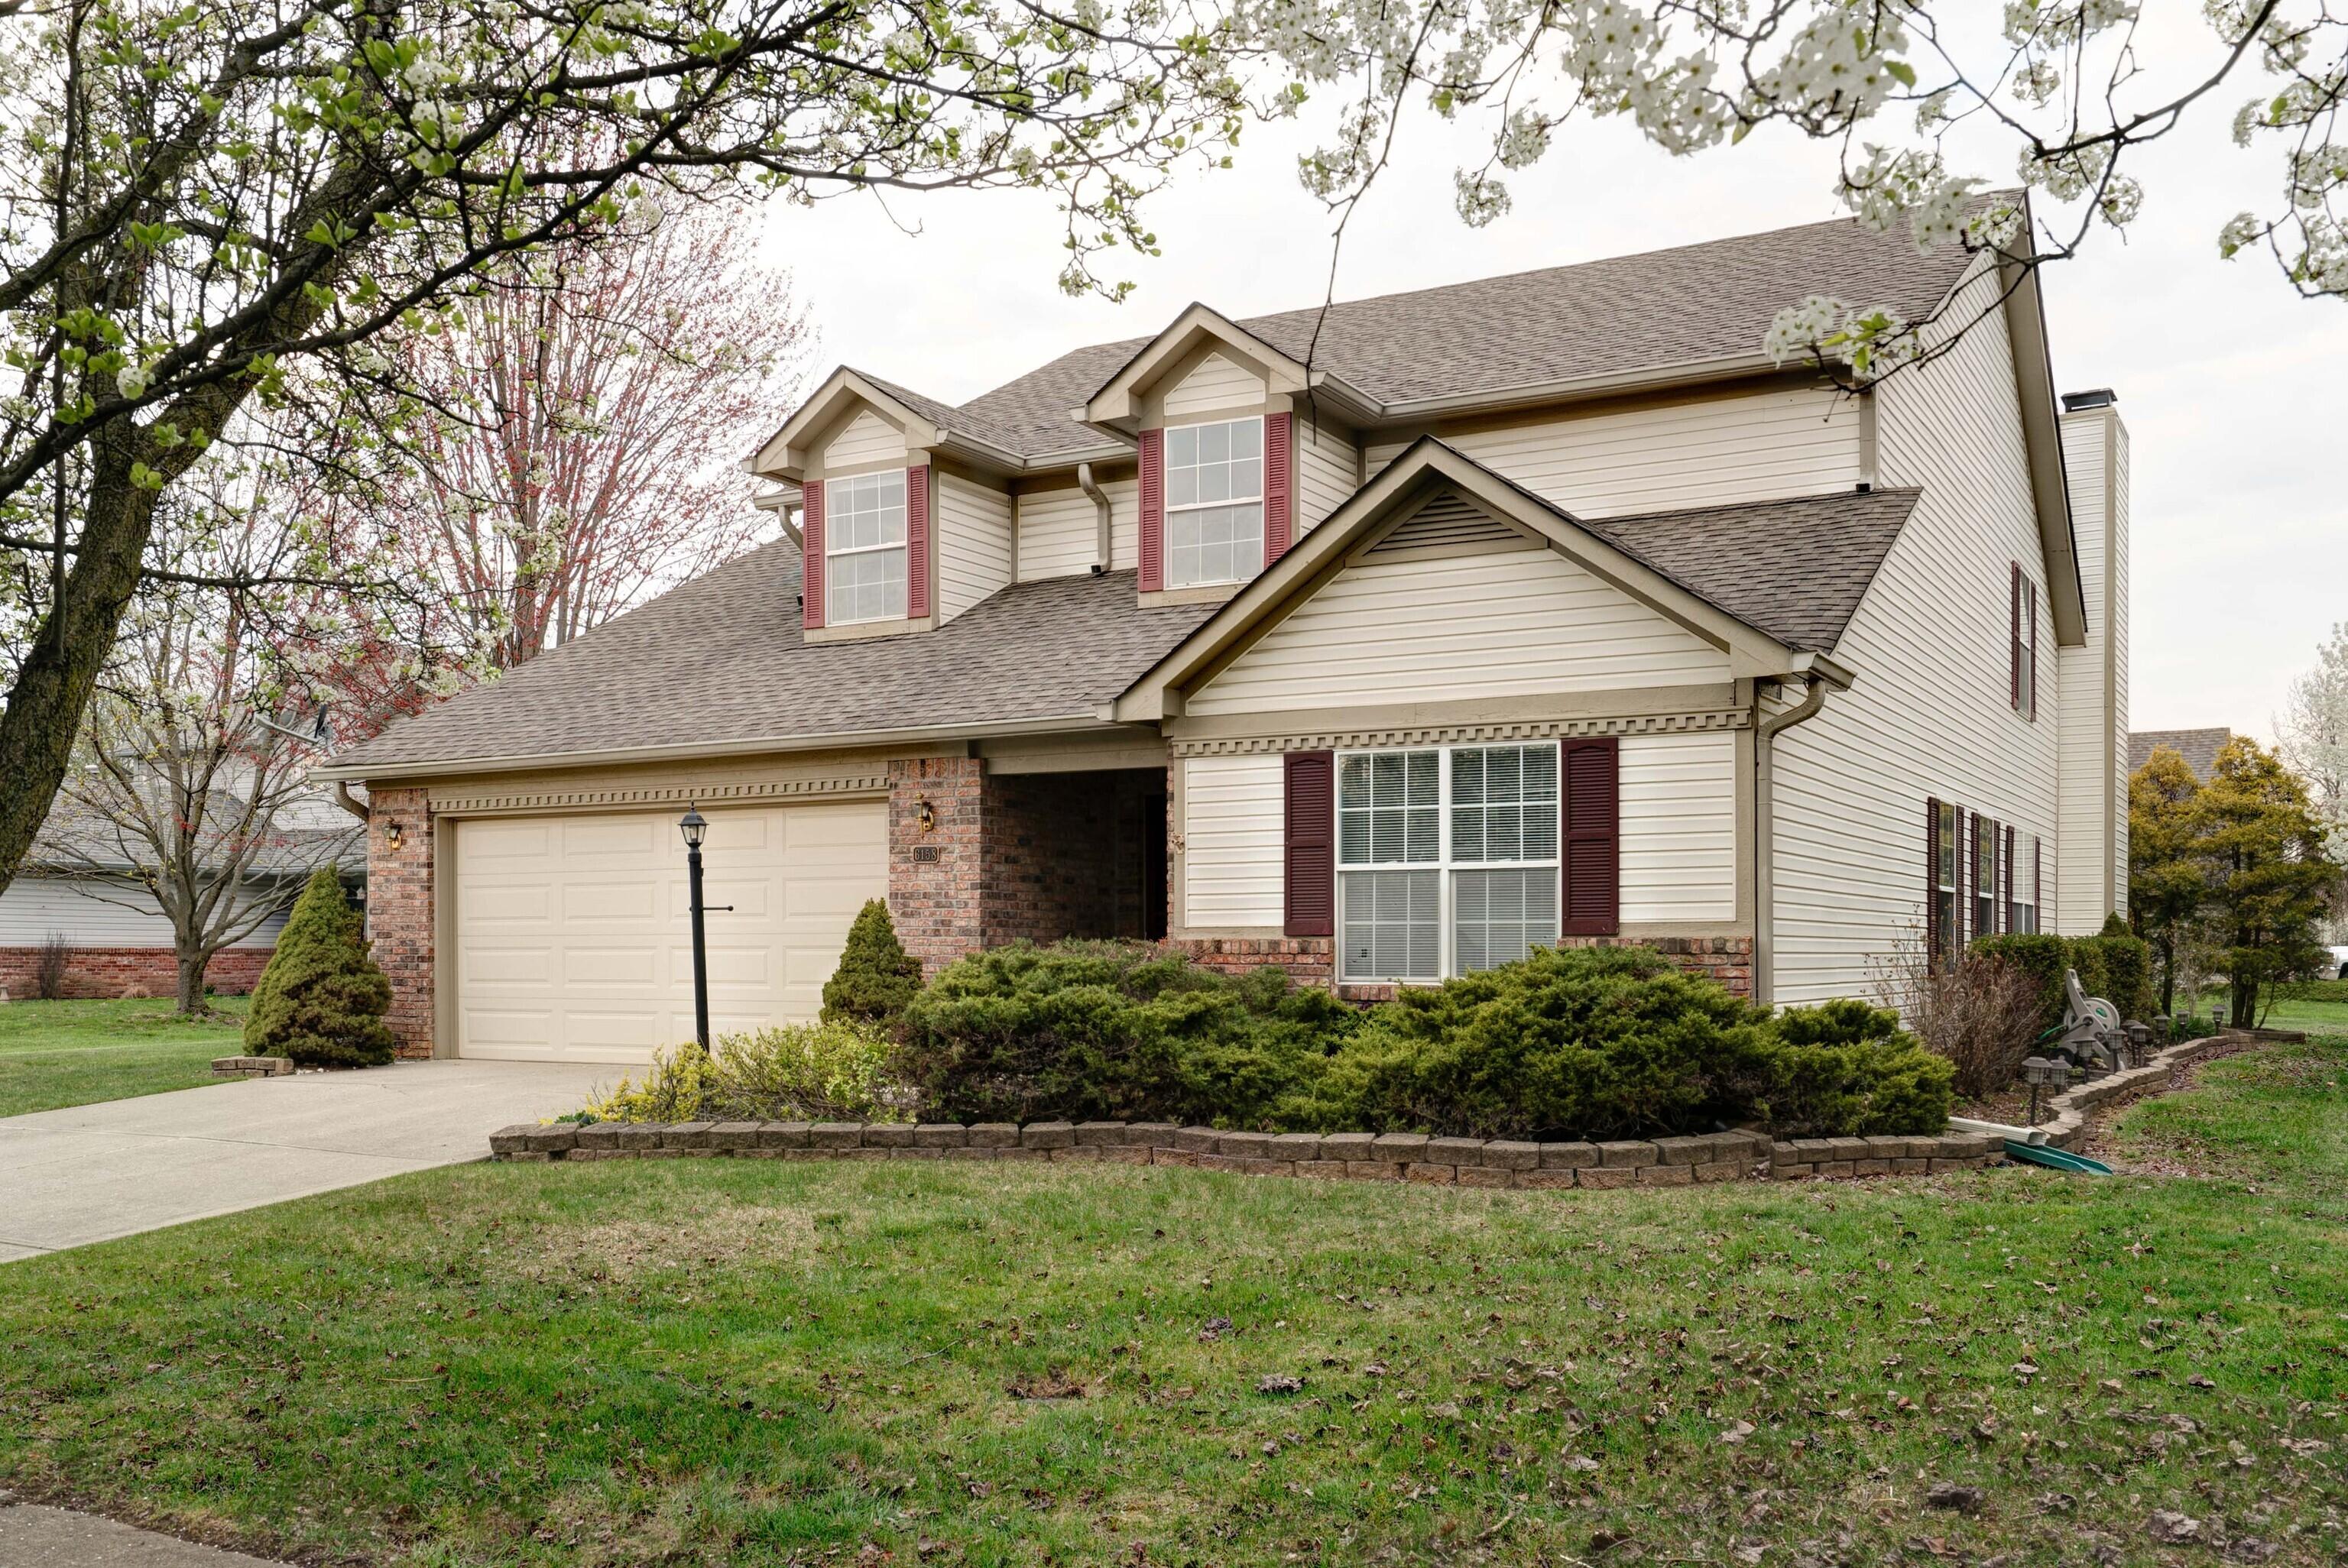 Photo one of 6158 Oakbay Ct Indianapolis IN 46237 | MLS 21959275